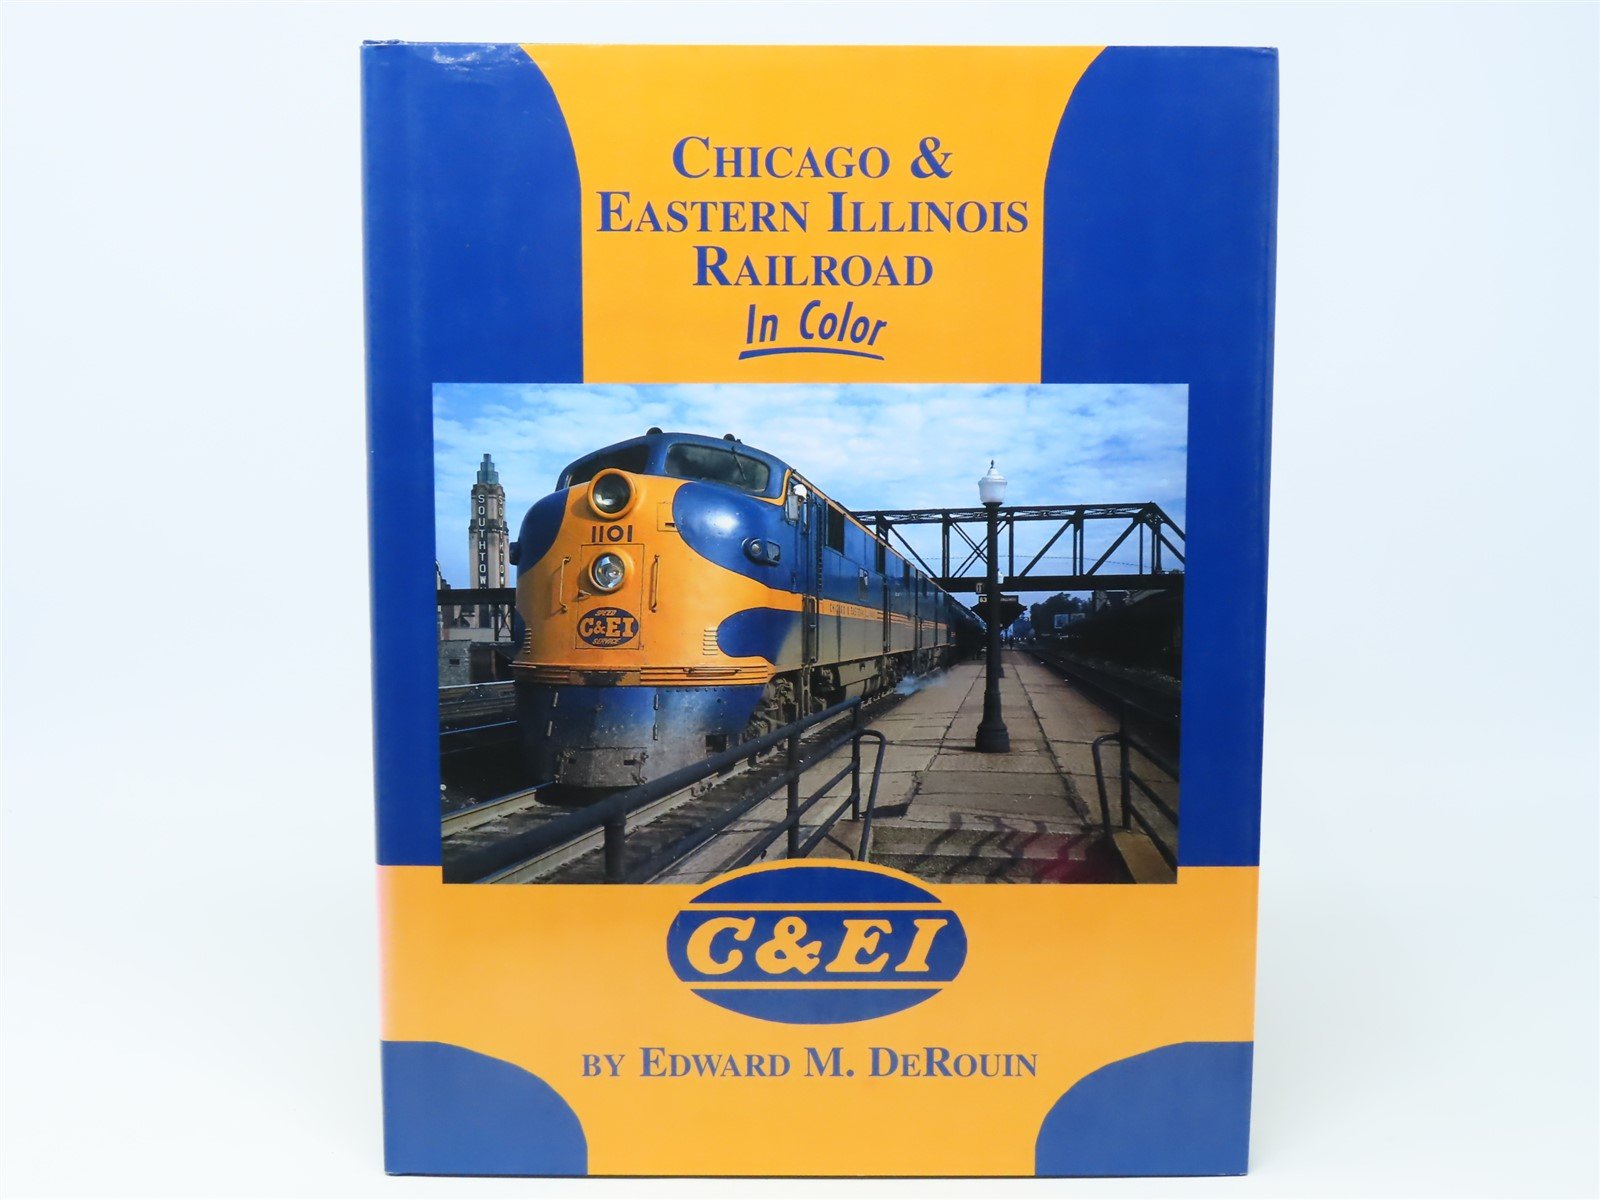 Morning Sun - Chicago & Eastern Illinois Railroad in Color by DeRouin ©2001 HC